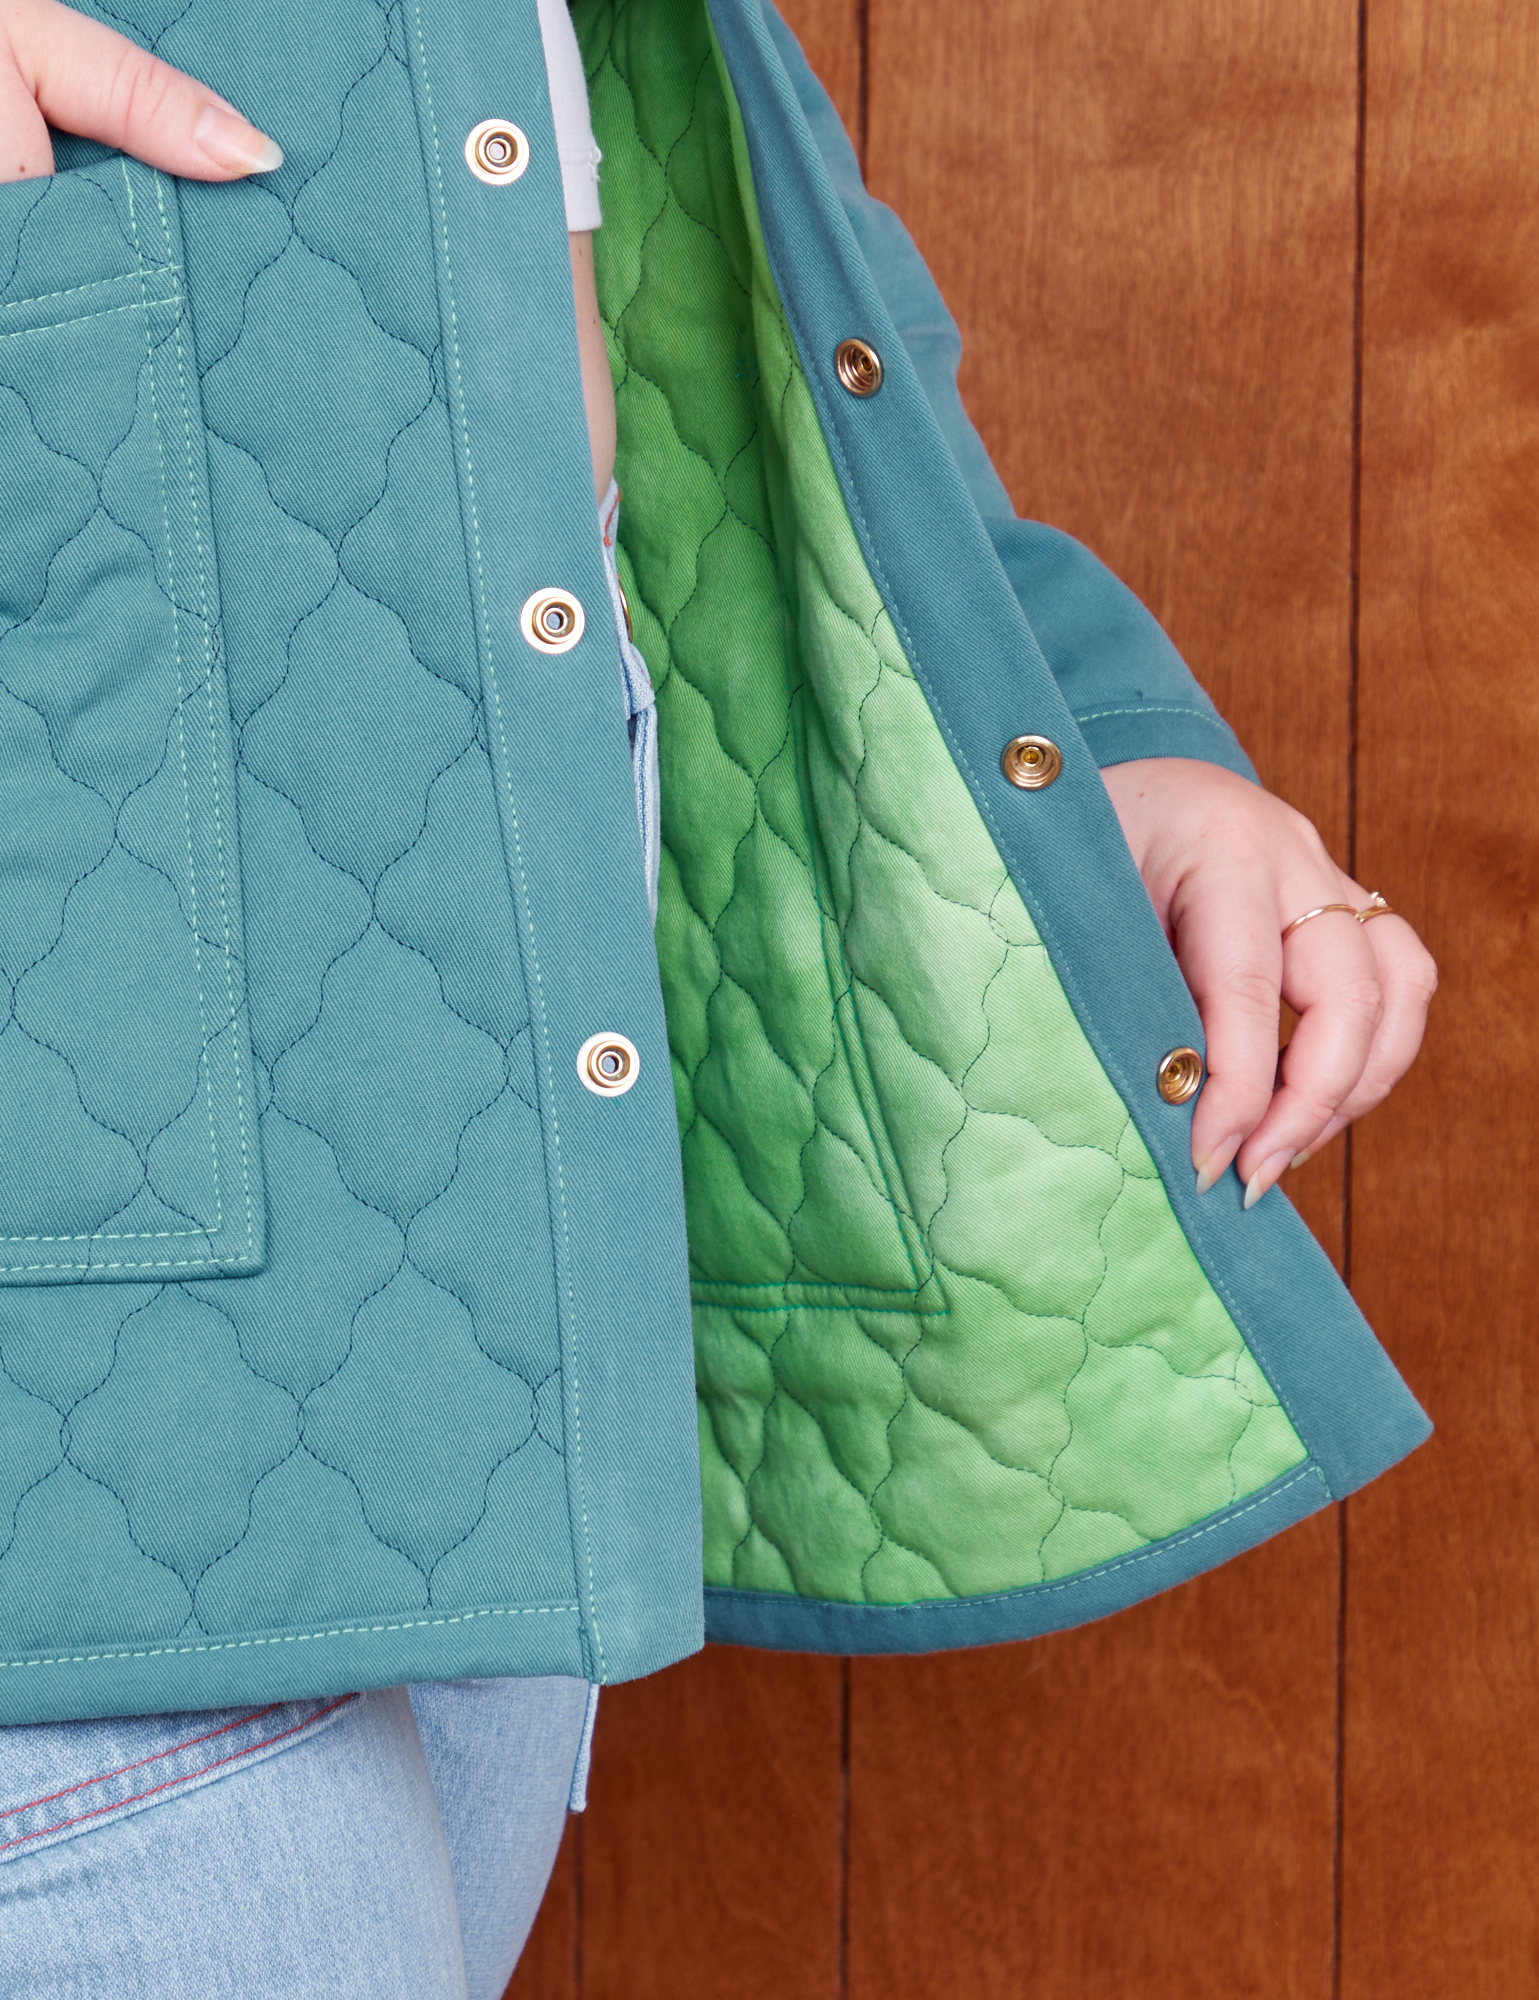 Quilted Overcoat in Marine Blue interior fabric close up in a green tonal tie dye